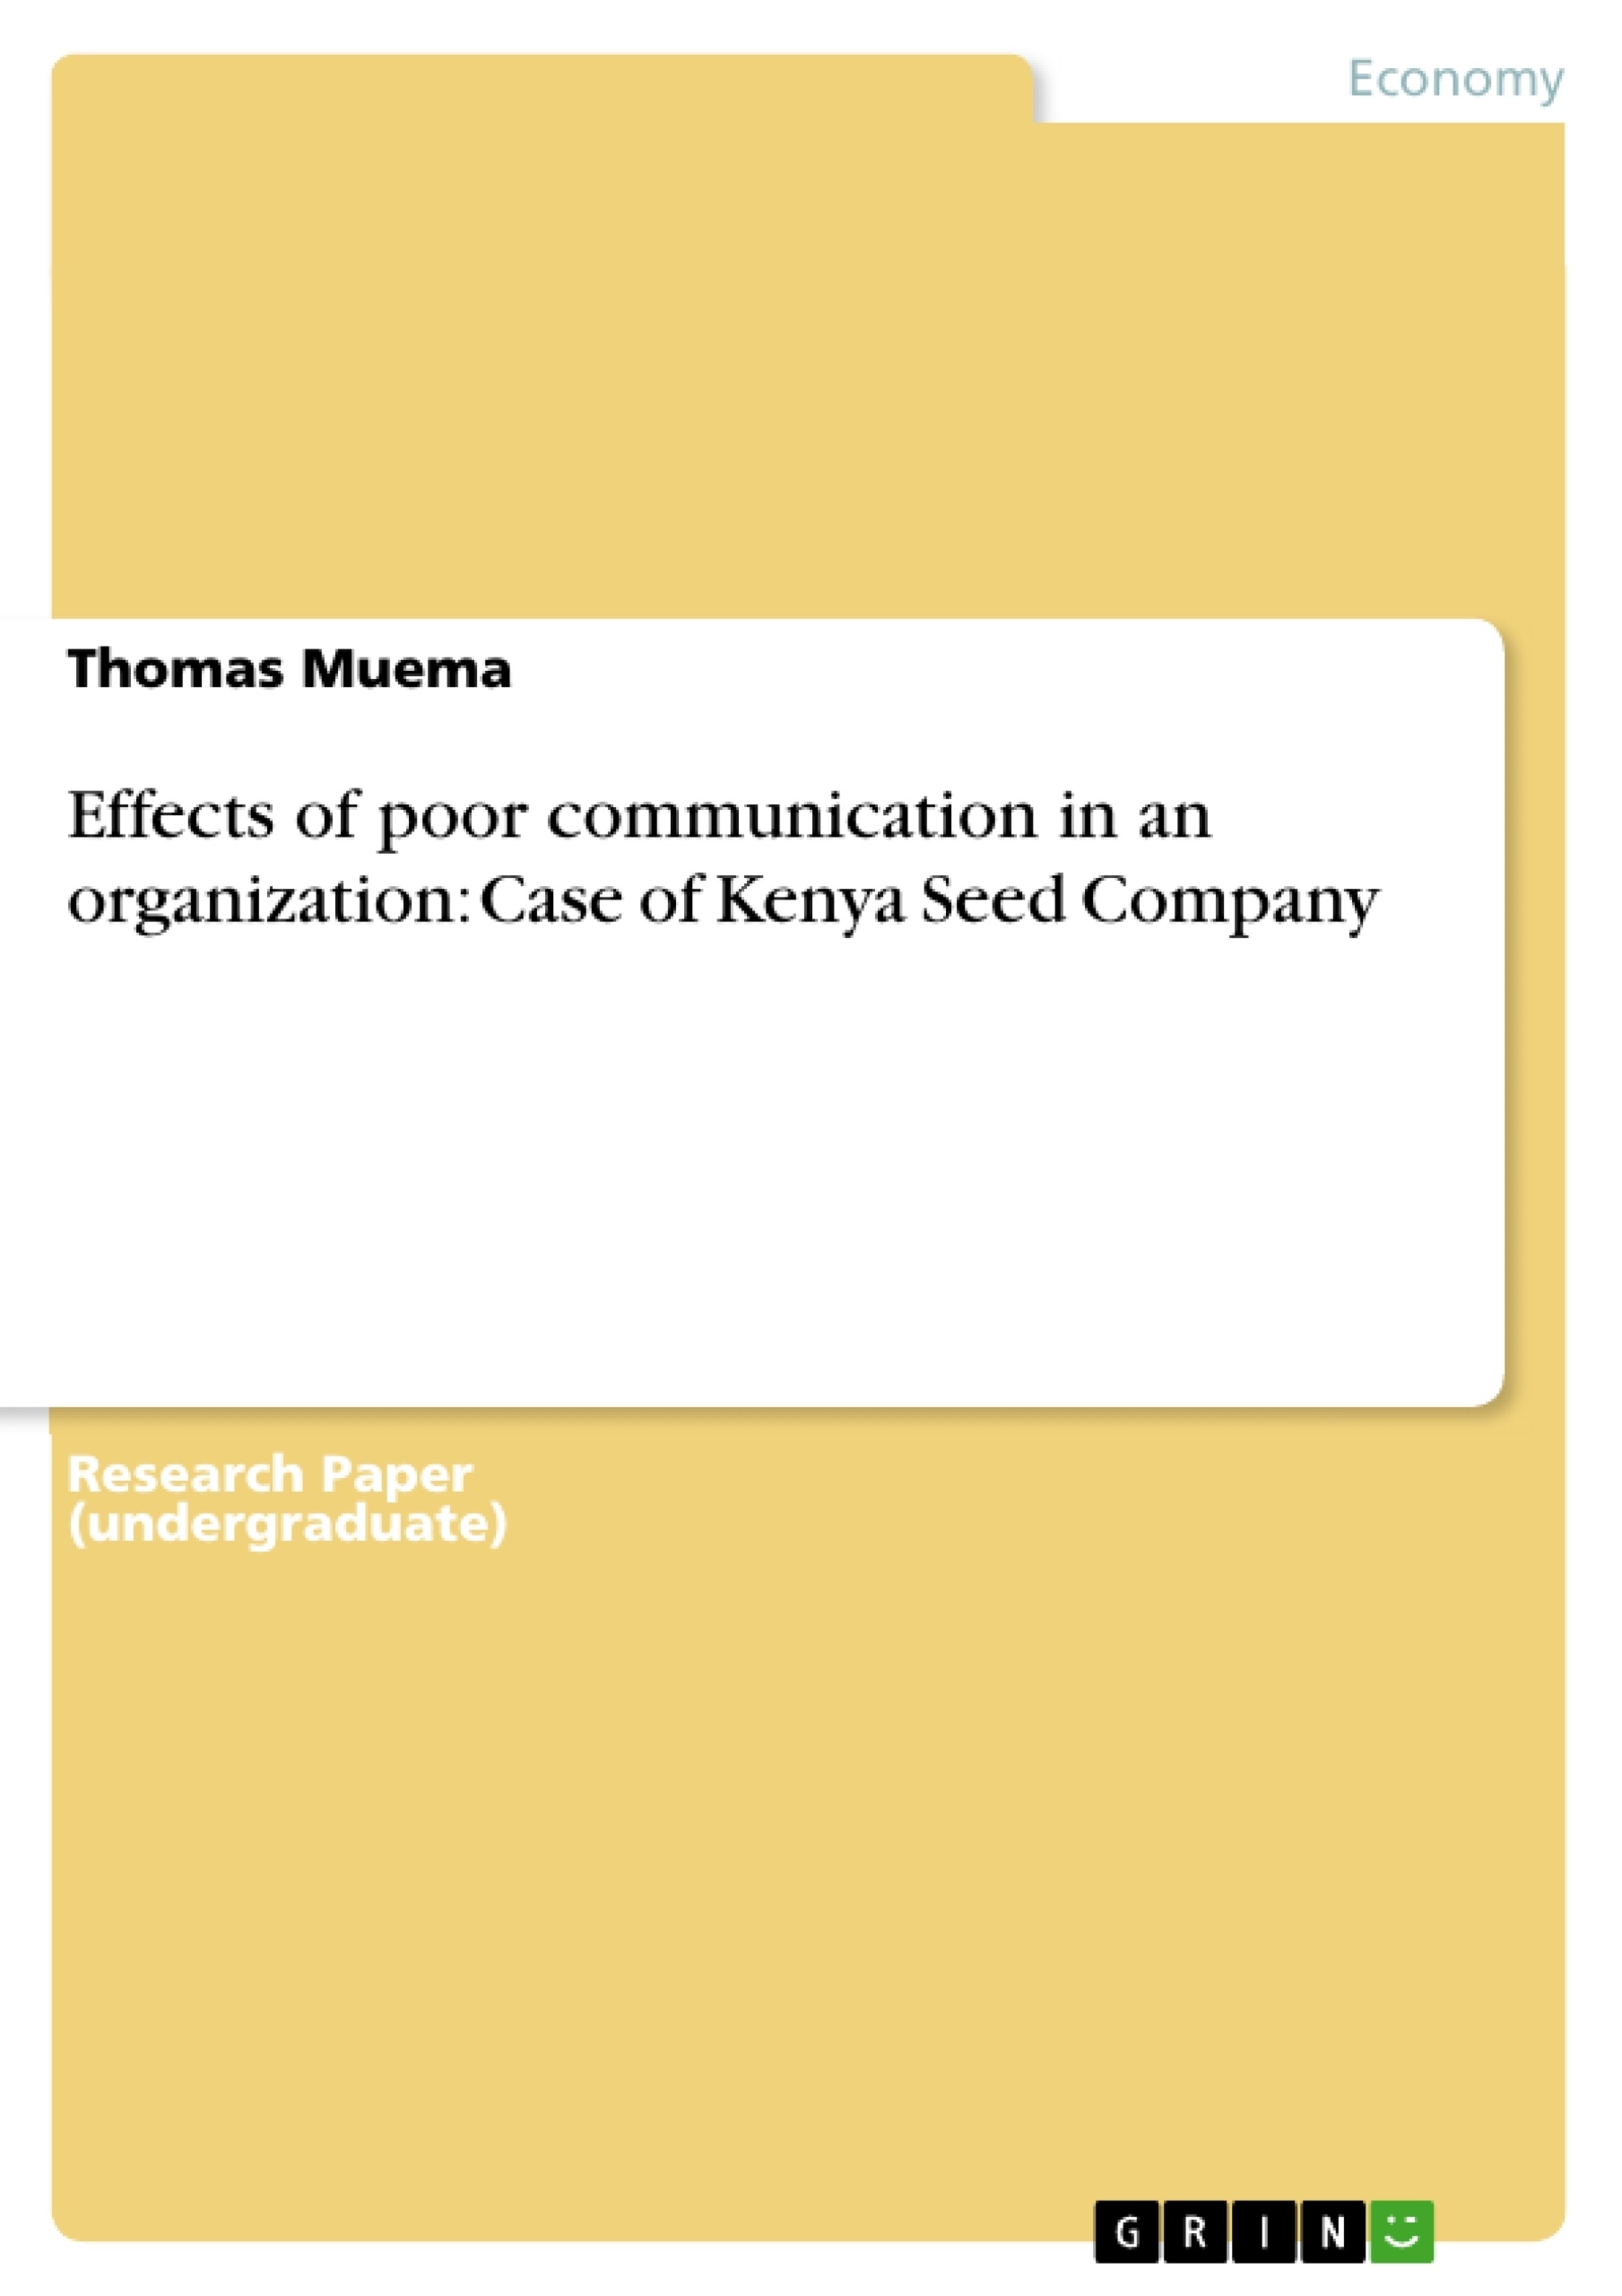 Title: Effects of poor communication in an organization: Case of Kenya Seed Company